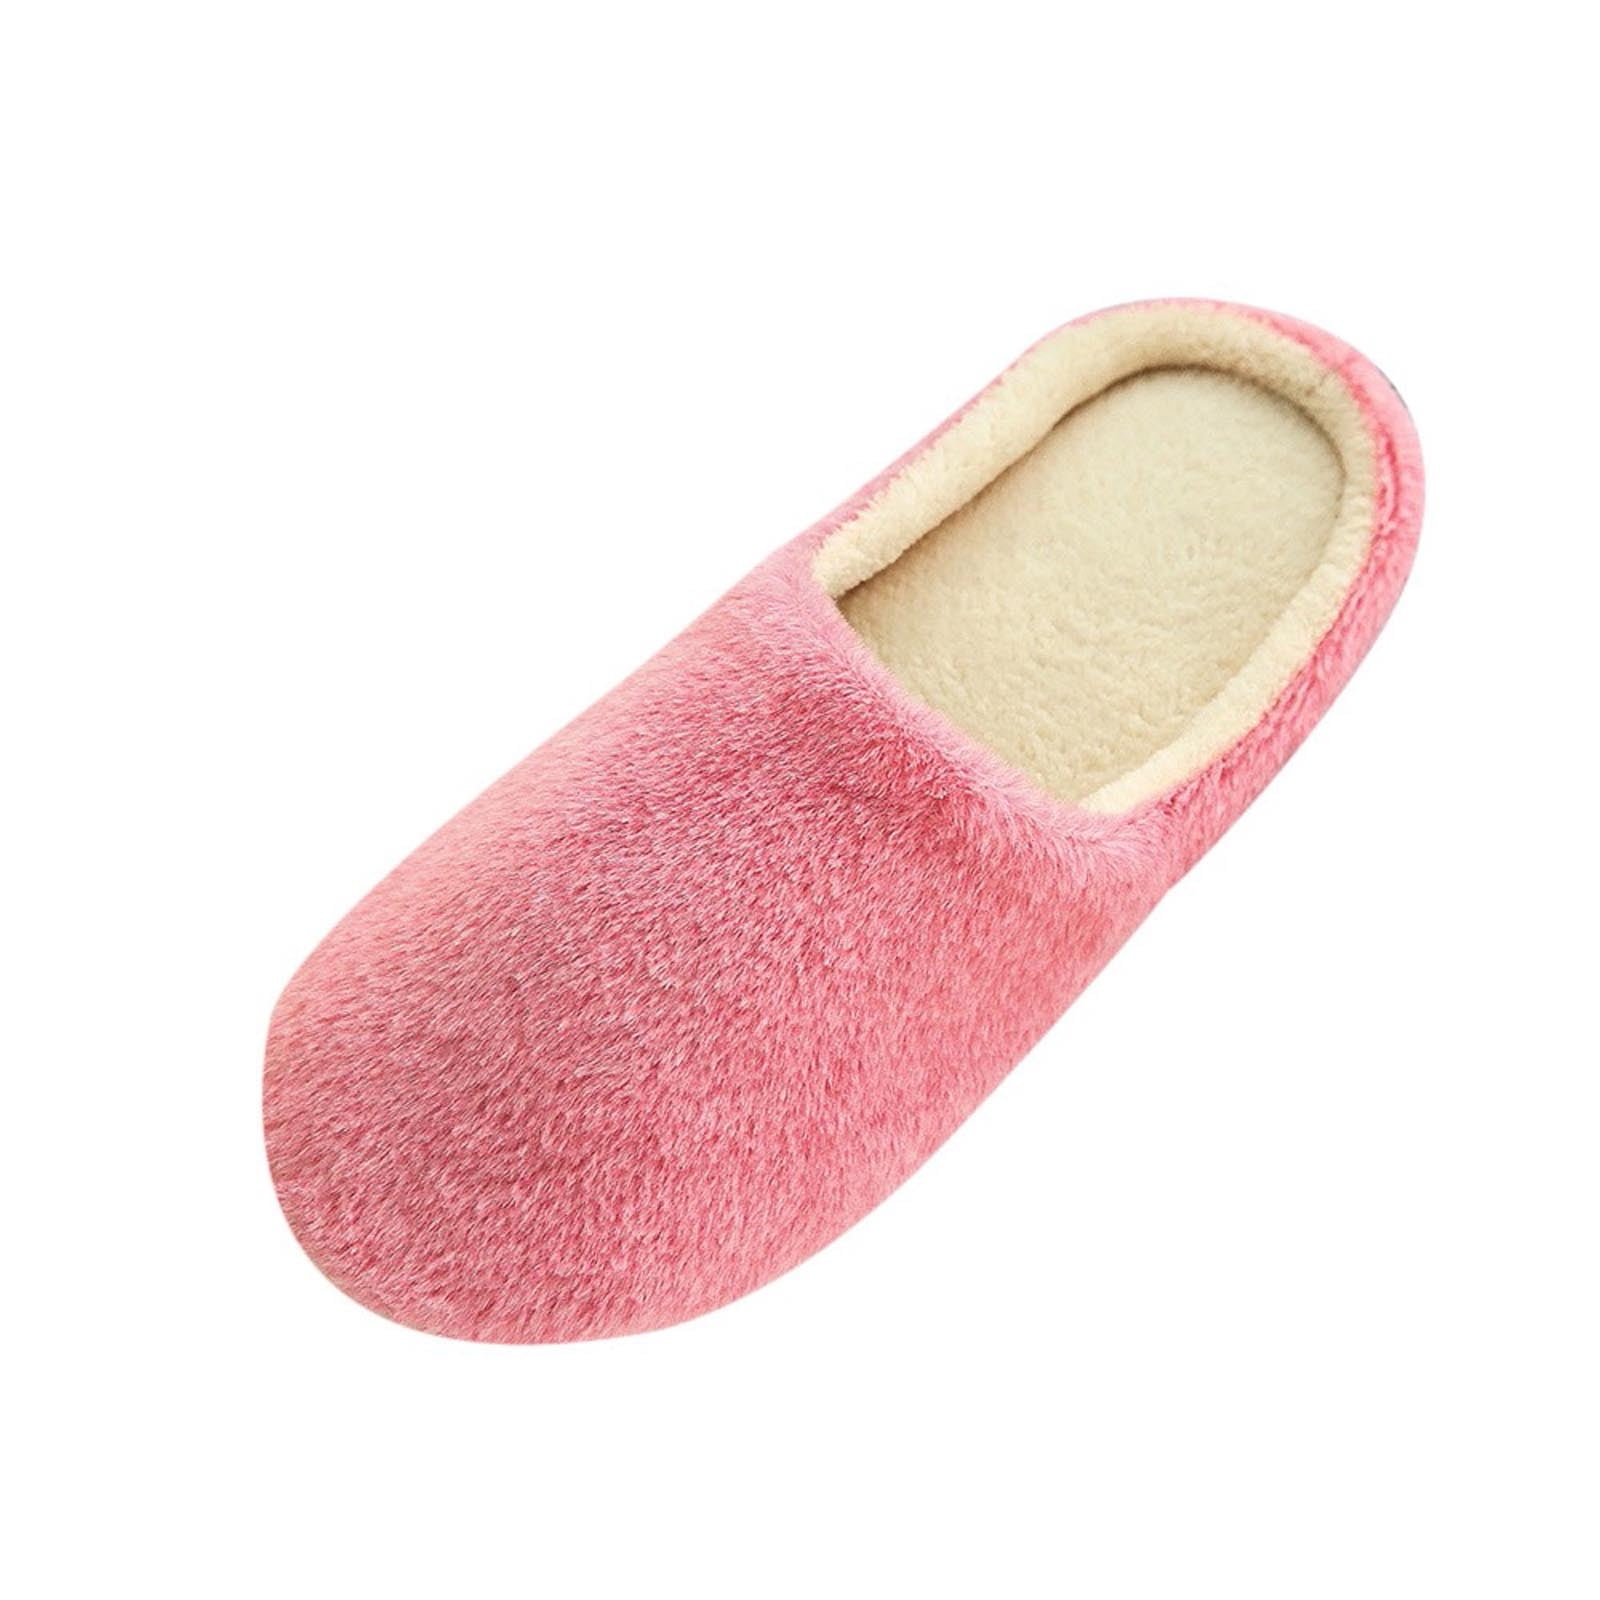 Stamzod Clearance Slippers Women Indoor House Plush Soft Cute Cotton ...